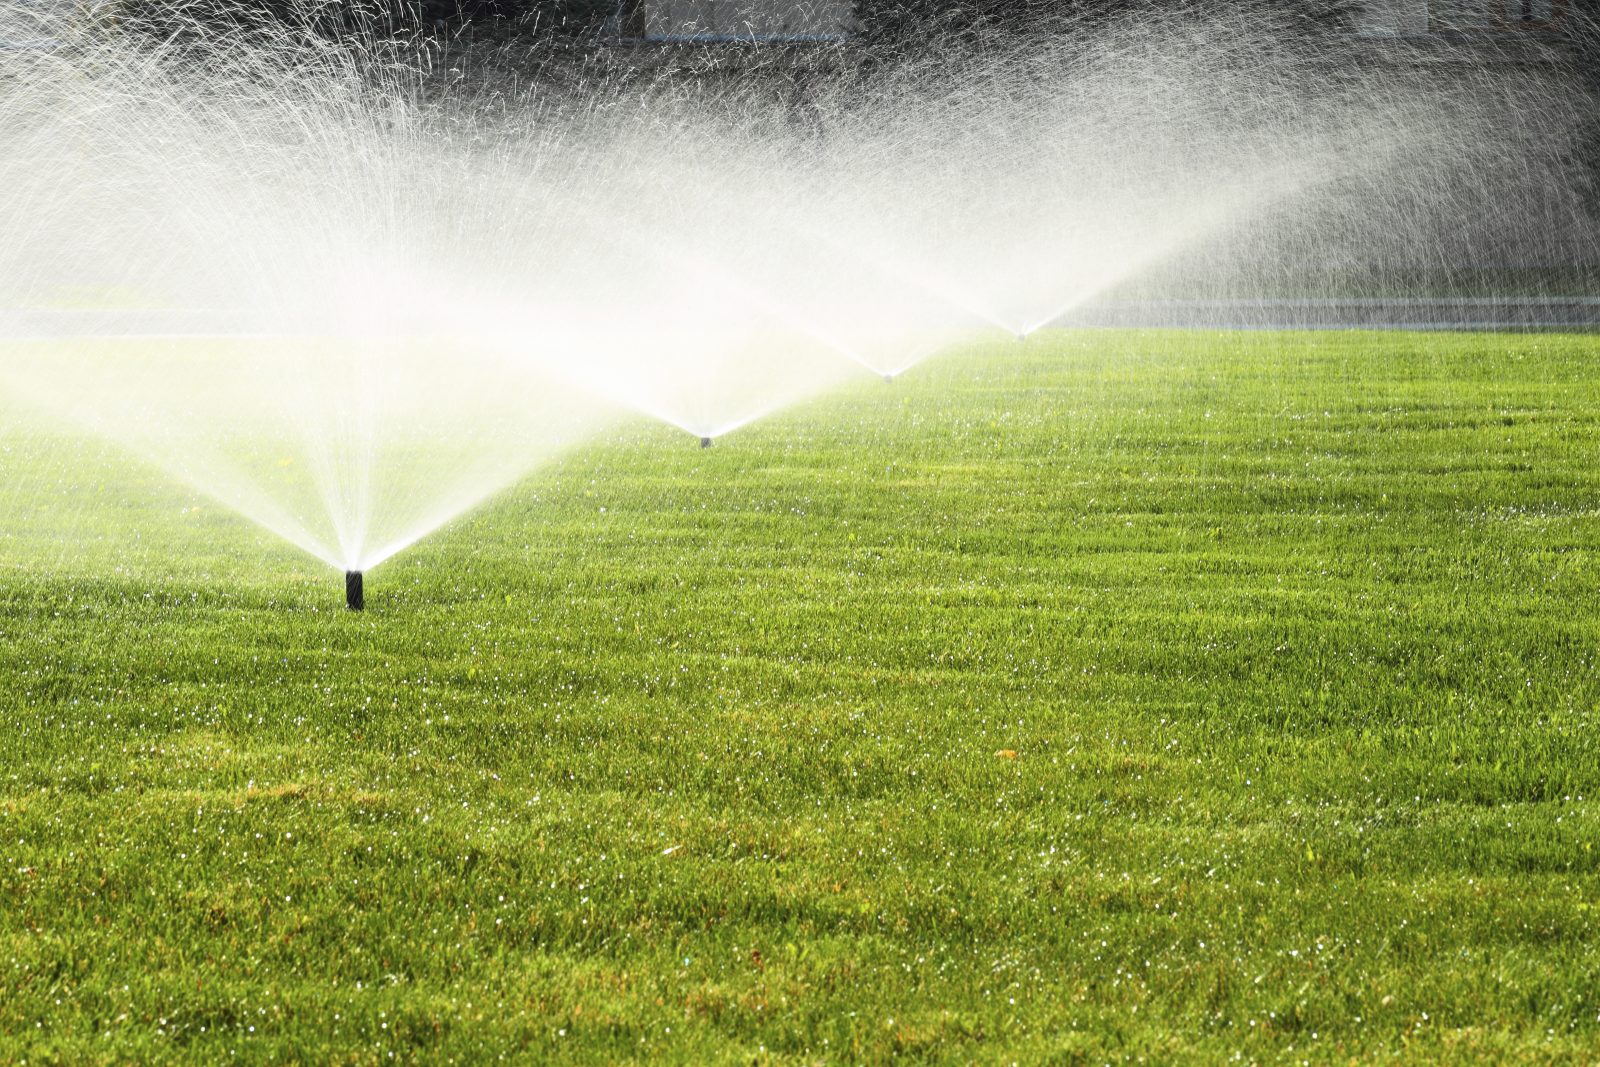 Overwatering your property can negatively impact the growth of your garden.